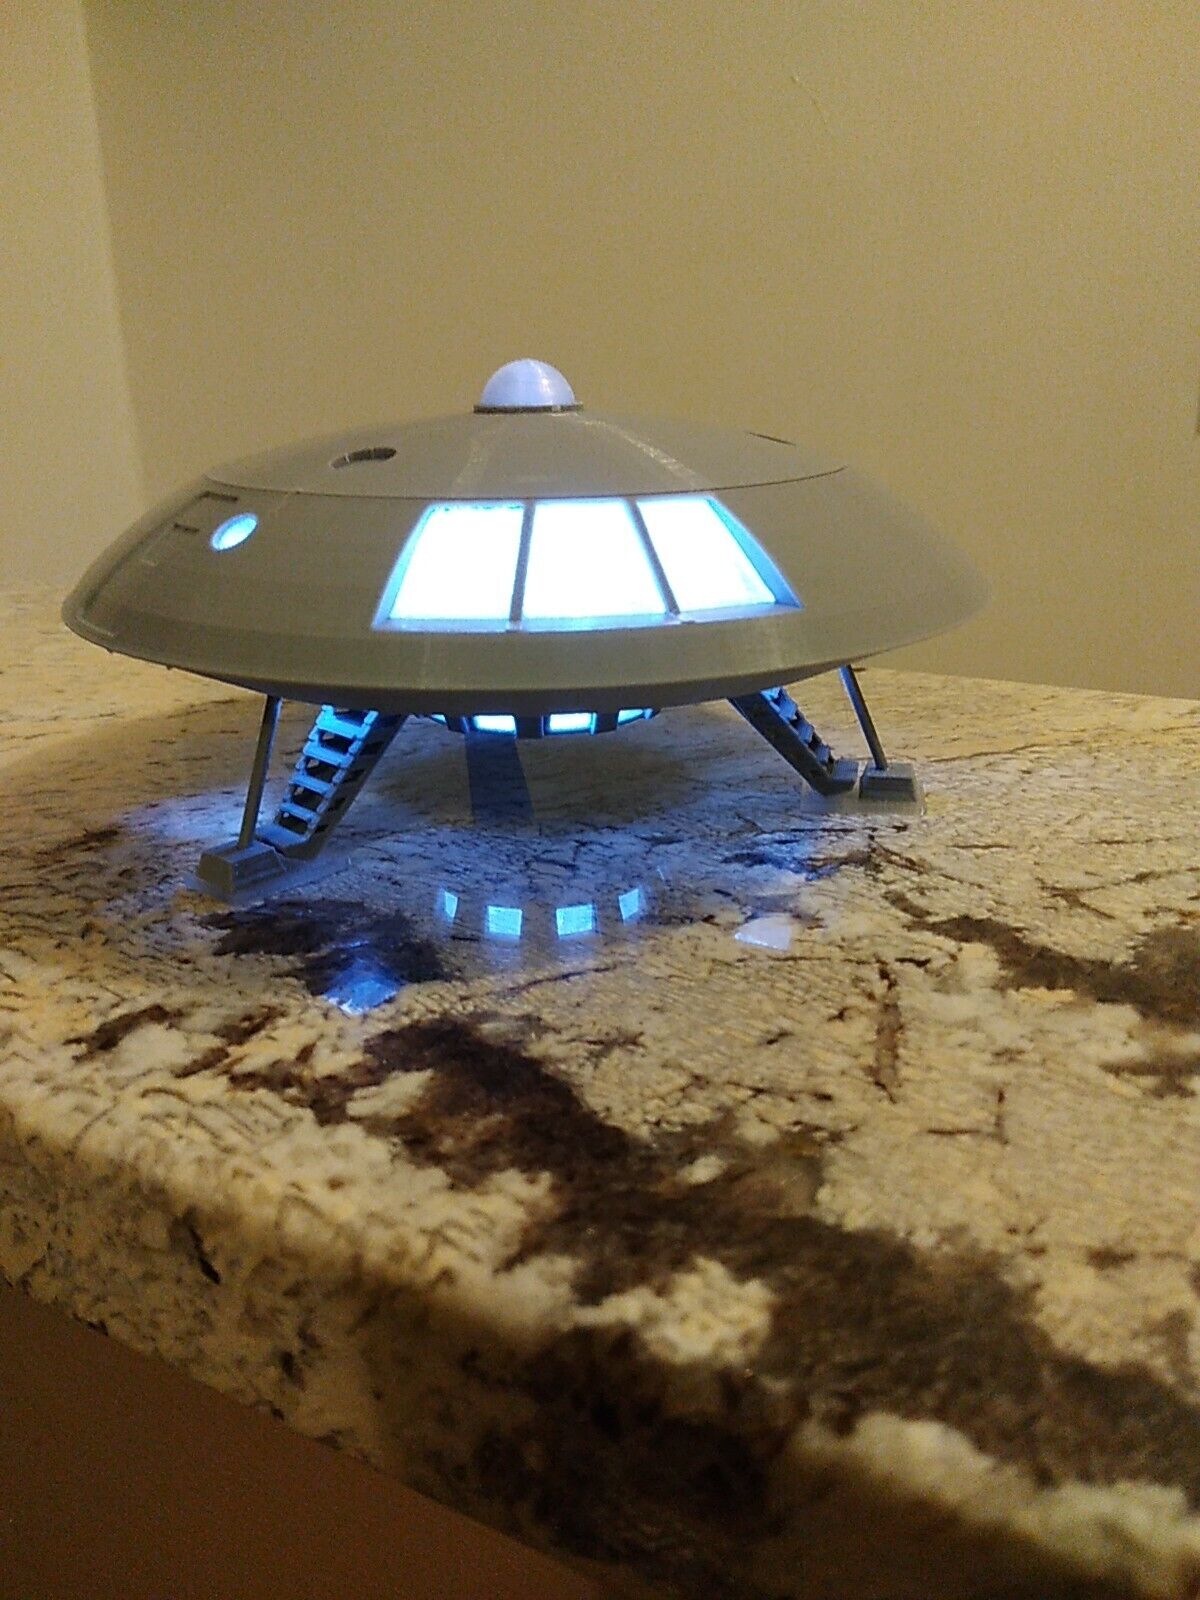 Jupiter 2  Lost in Space Flying Saucer  Space Ship With Lights. 6 Inch Diameter.